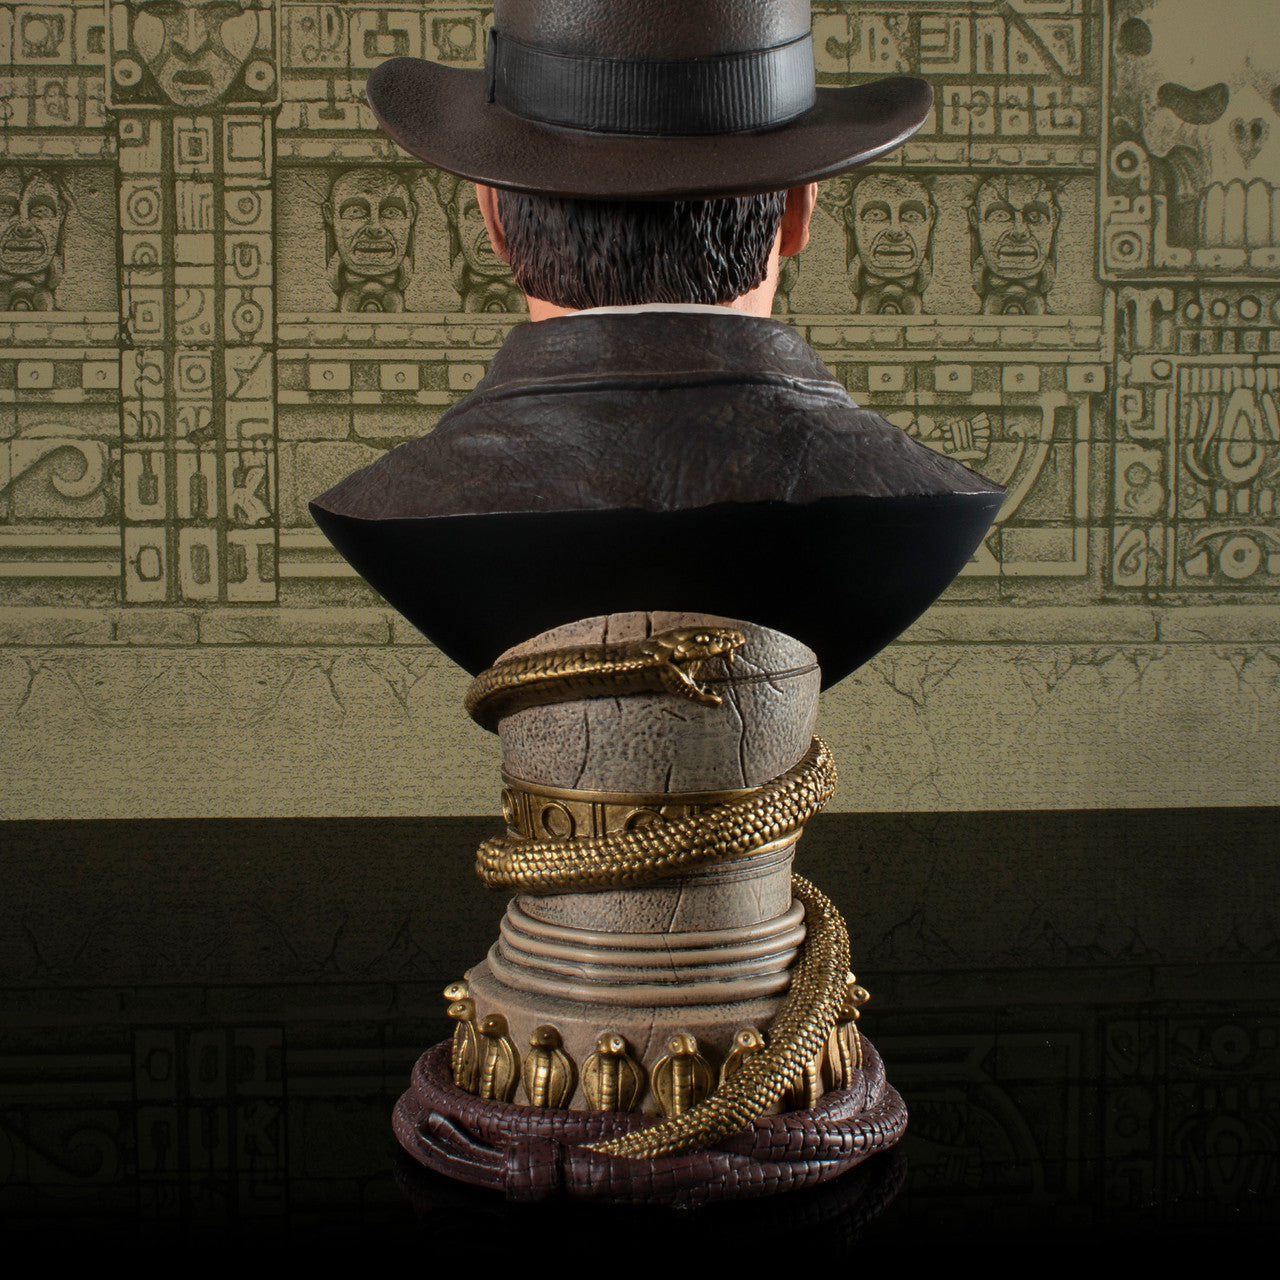 Indiana Jones Raiders of the Lost Ark Legends in 3D Indiana Jones 1:2 Scale Bust by Diamond Gallery -Diamond Gallery - India - www.superherotoystore.com